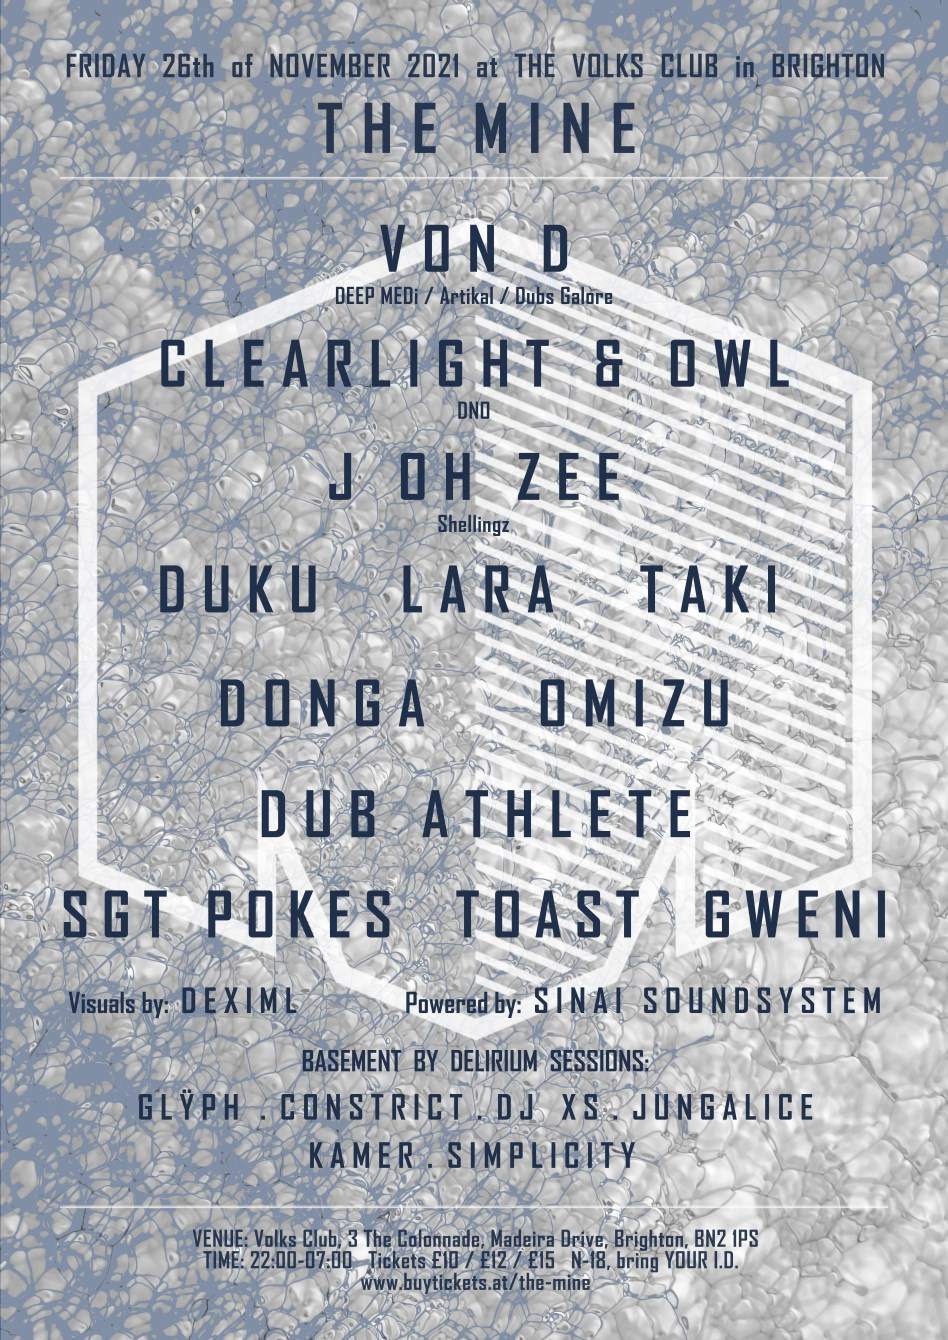 THE MINE with Von D, Clearlight & Owl, Glÿph, J Oh Zee, SGT Pokes Powered by Sinai Soundsystem - フライヤー裏